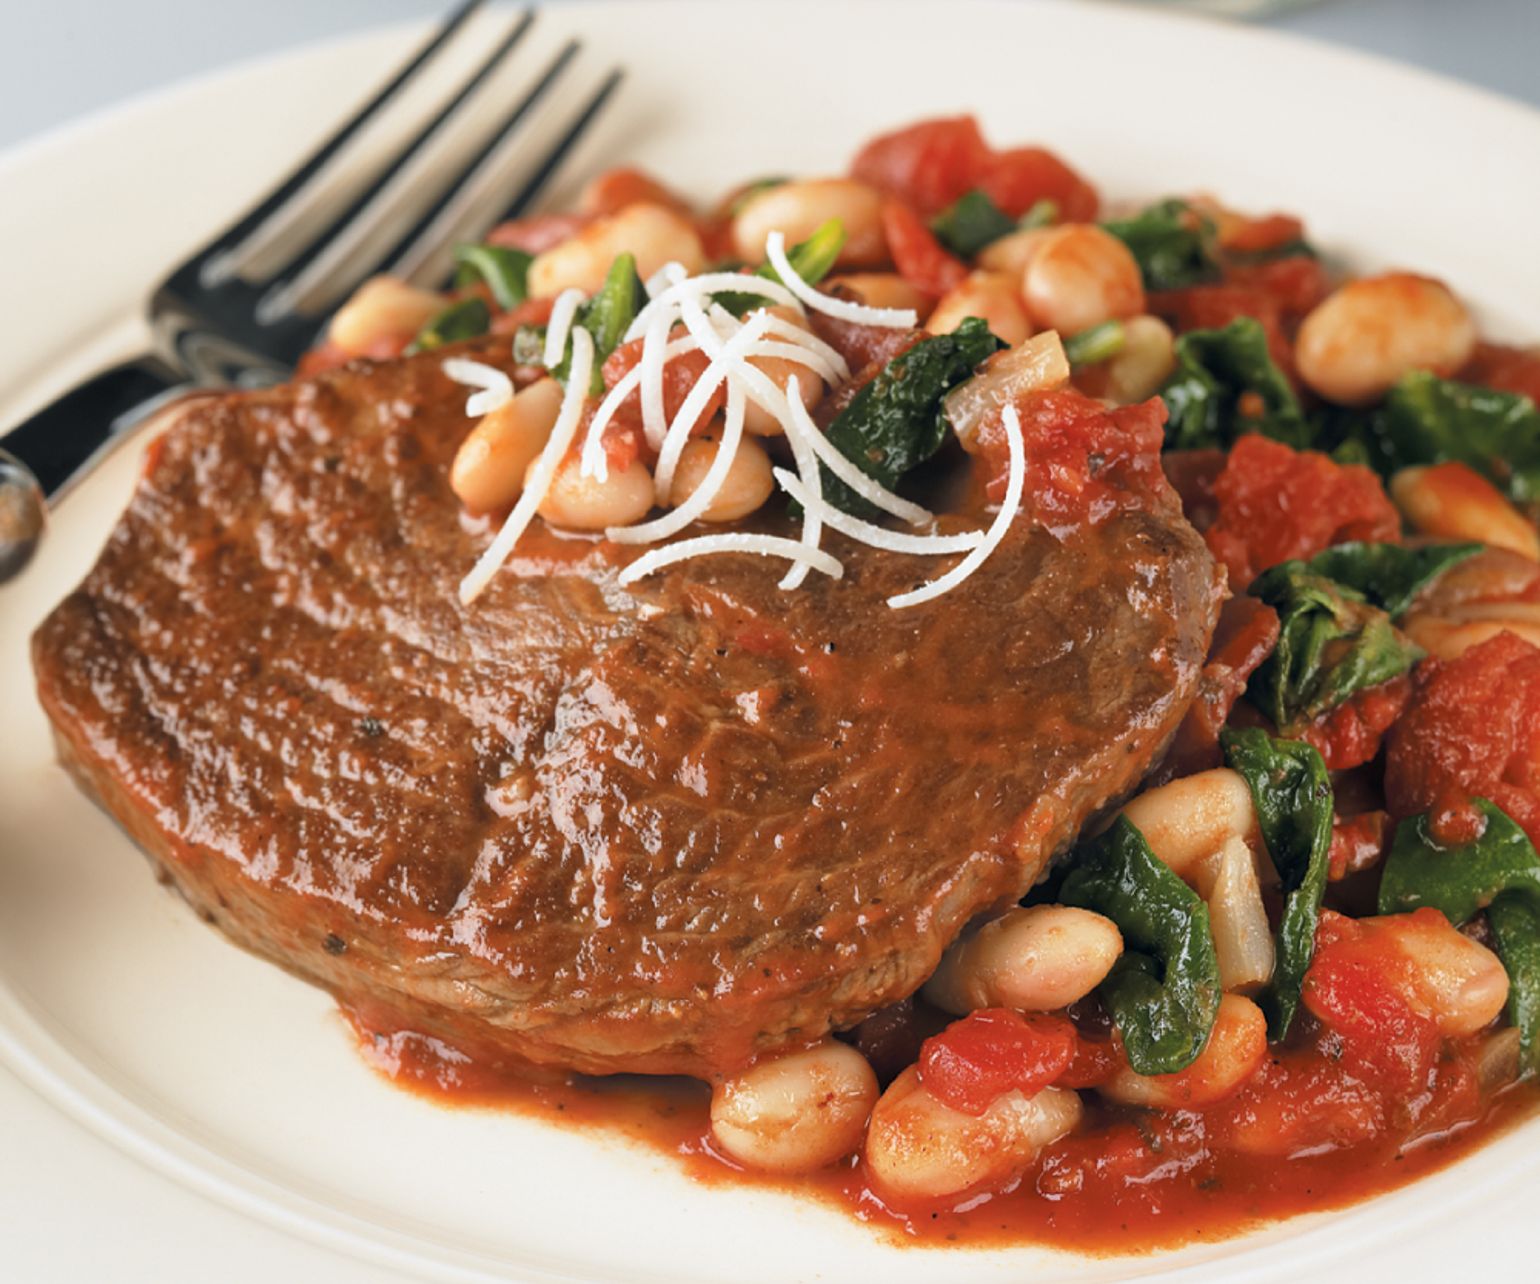 Braised Beef with Tomato-Garlic White Beans